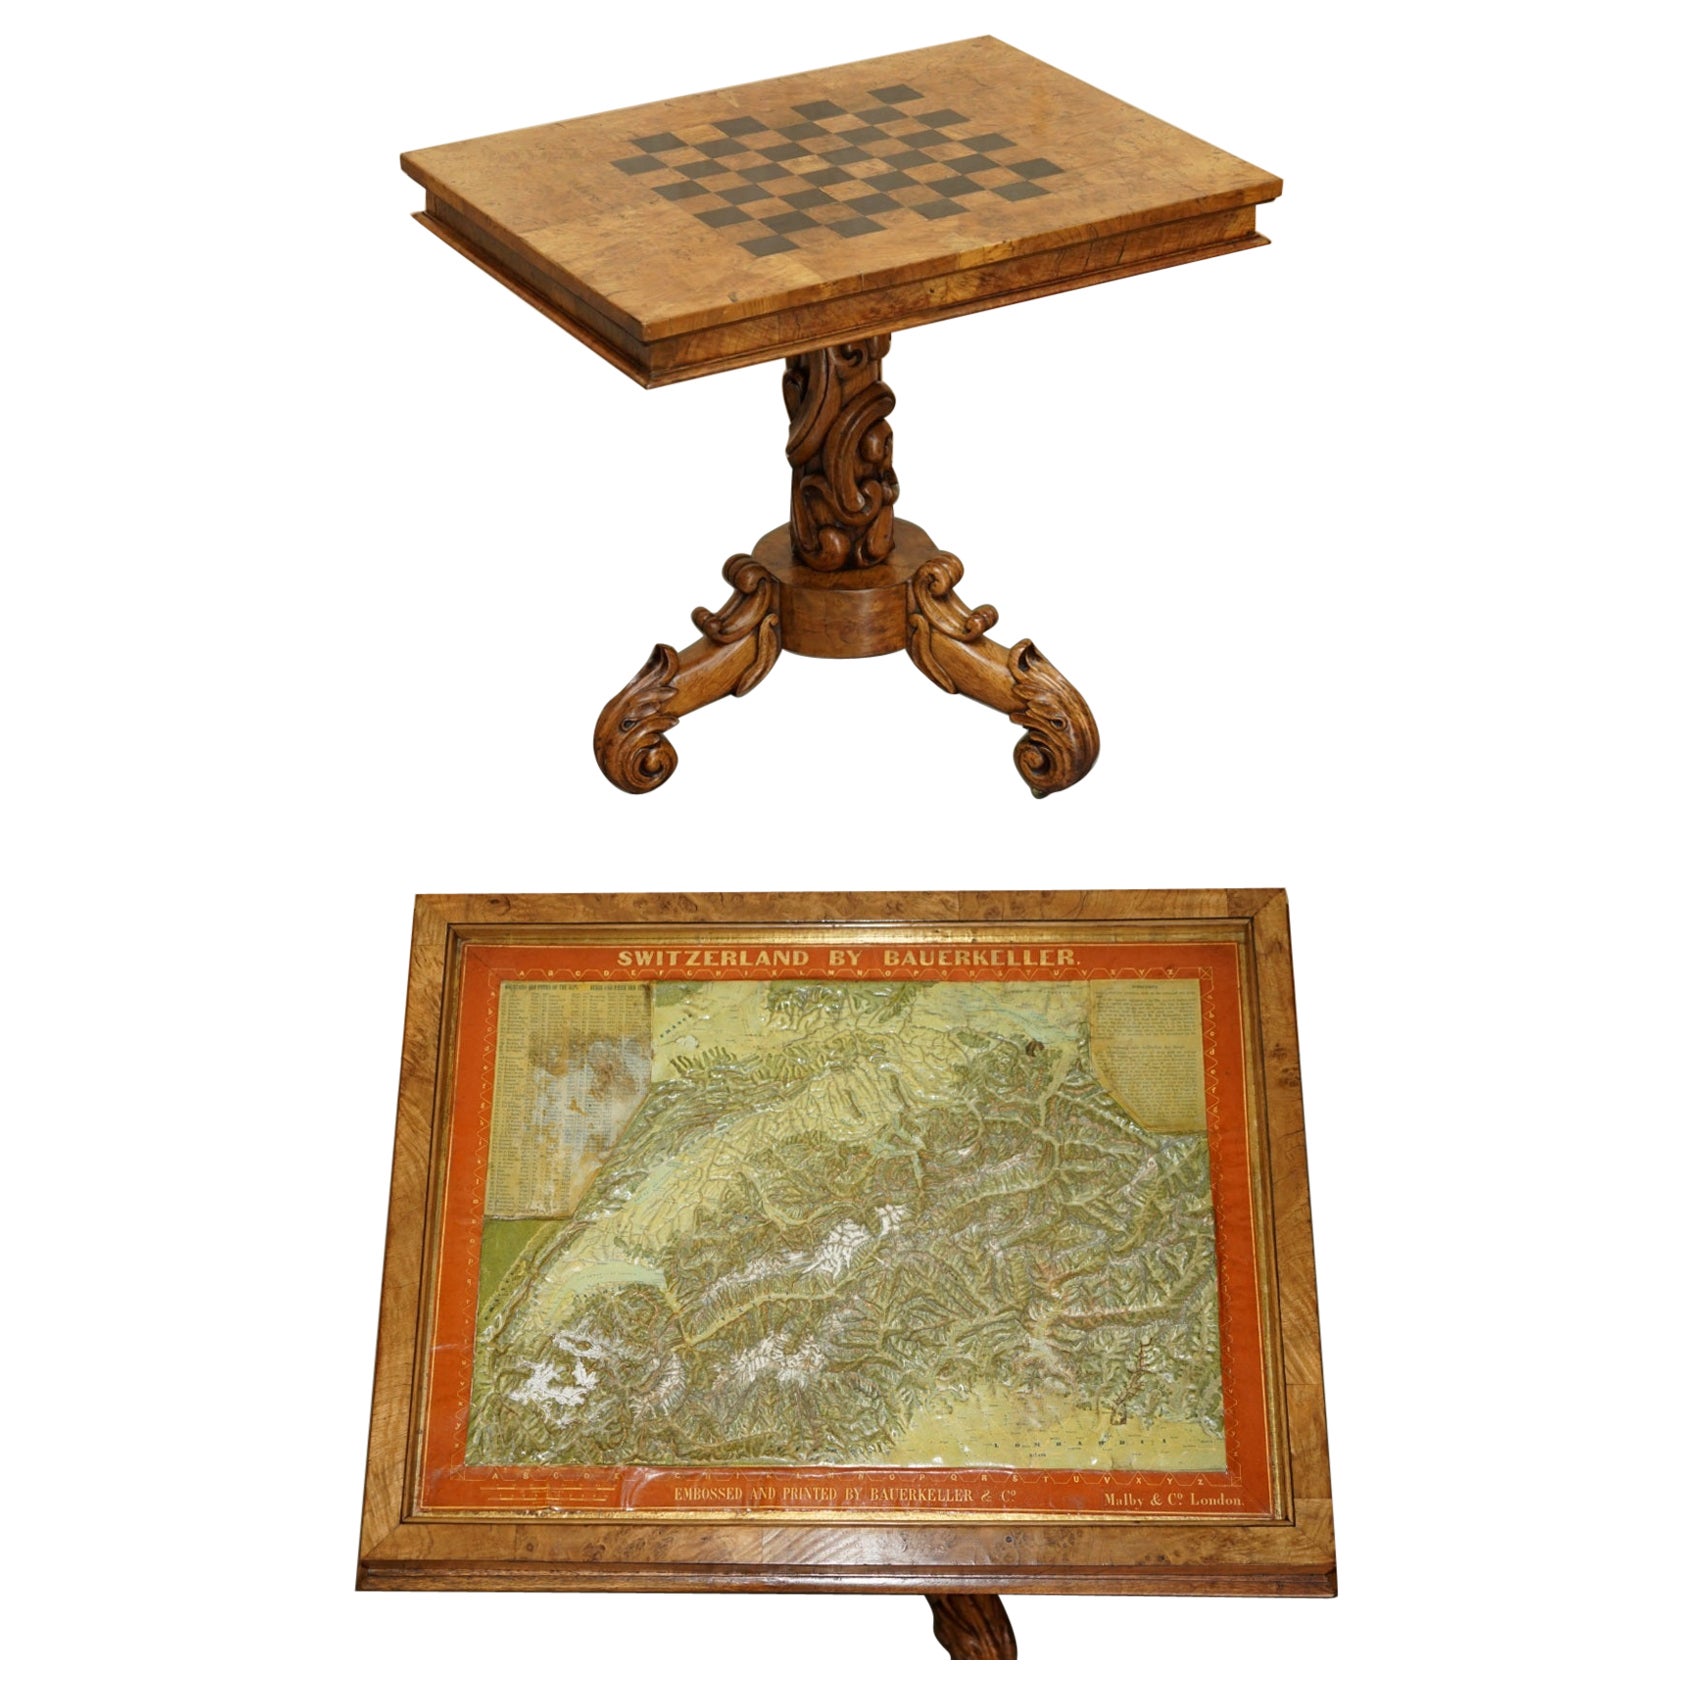 CIRCA 1850 MALBY & CO MAP OF SWiTZERLAND BY BAUERKELLER BURR WALNUT CHESS TABLE For Sale